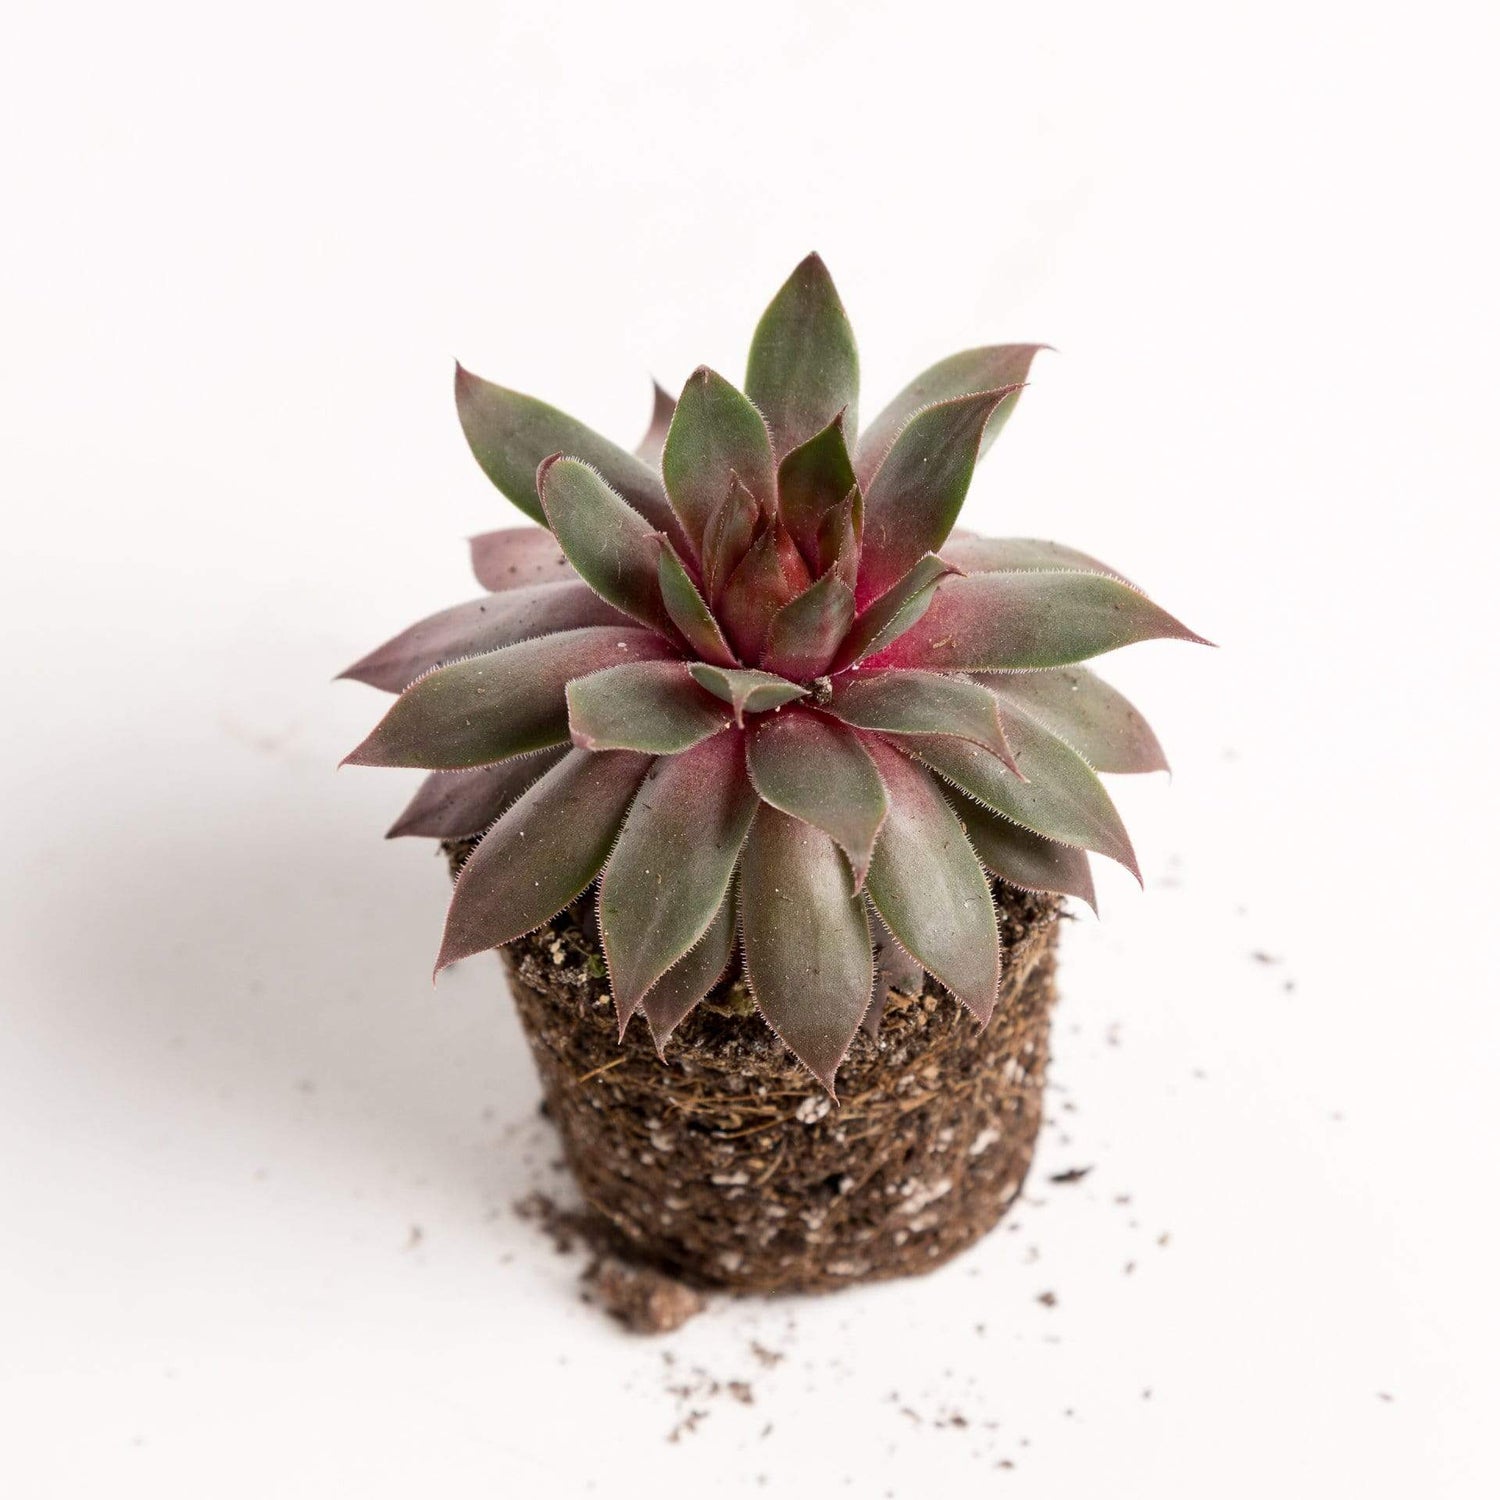 Urban Sprouts Plant 2" in nursery pot Succulent 'Hens and Chicks 'Plush Puppy'